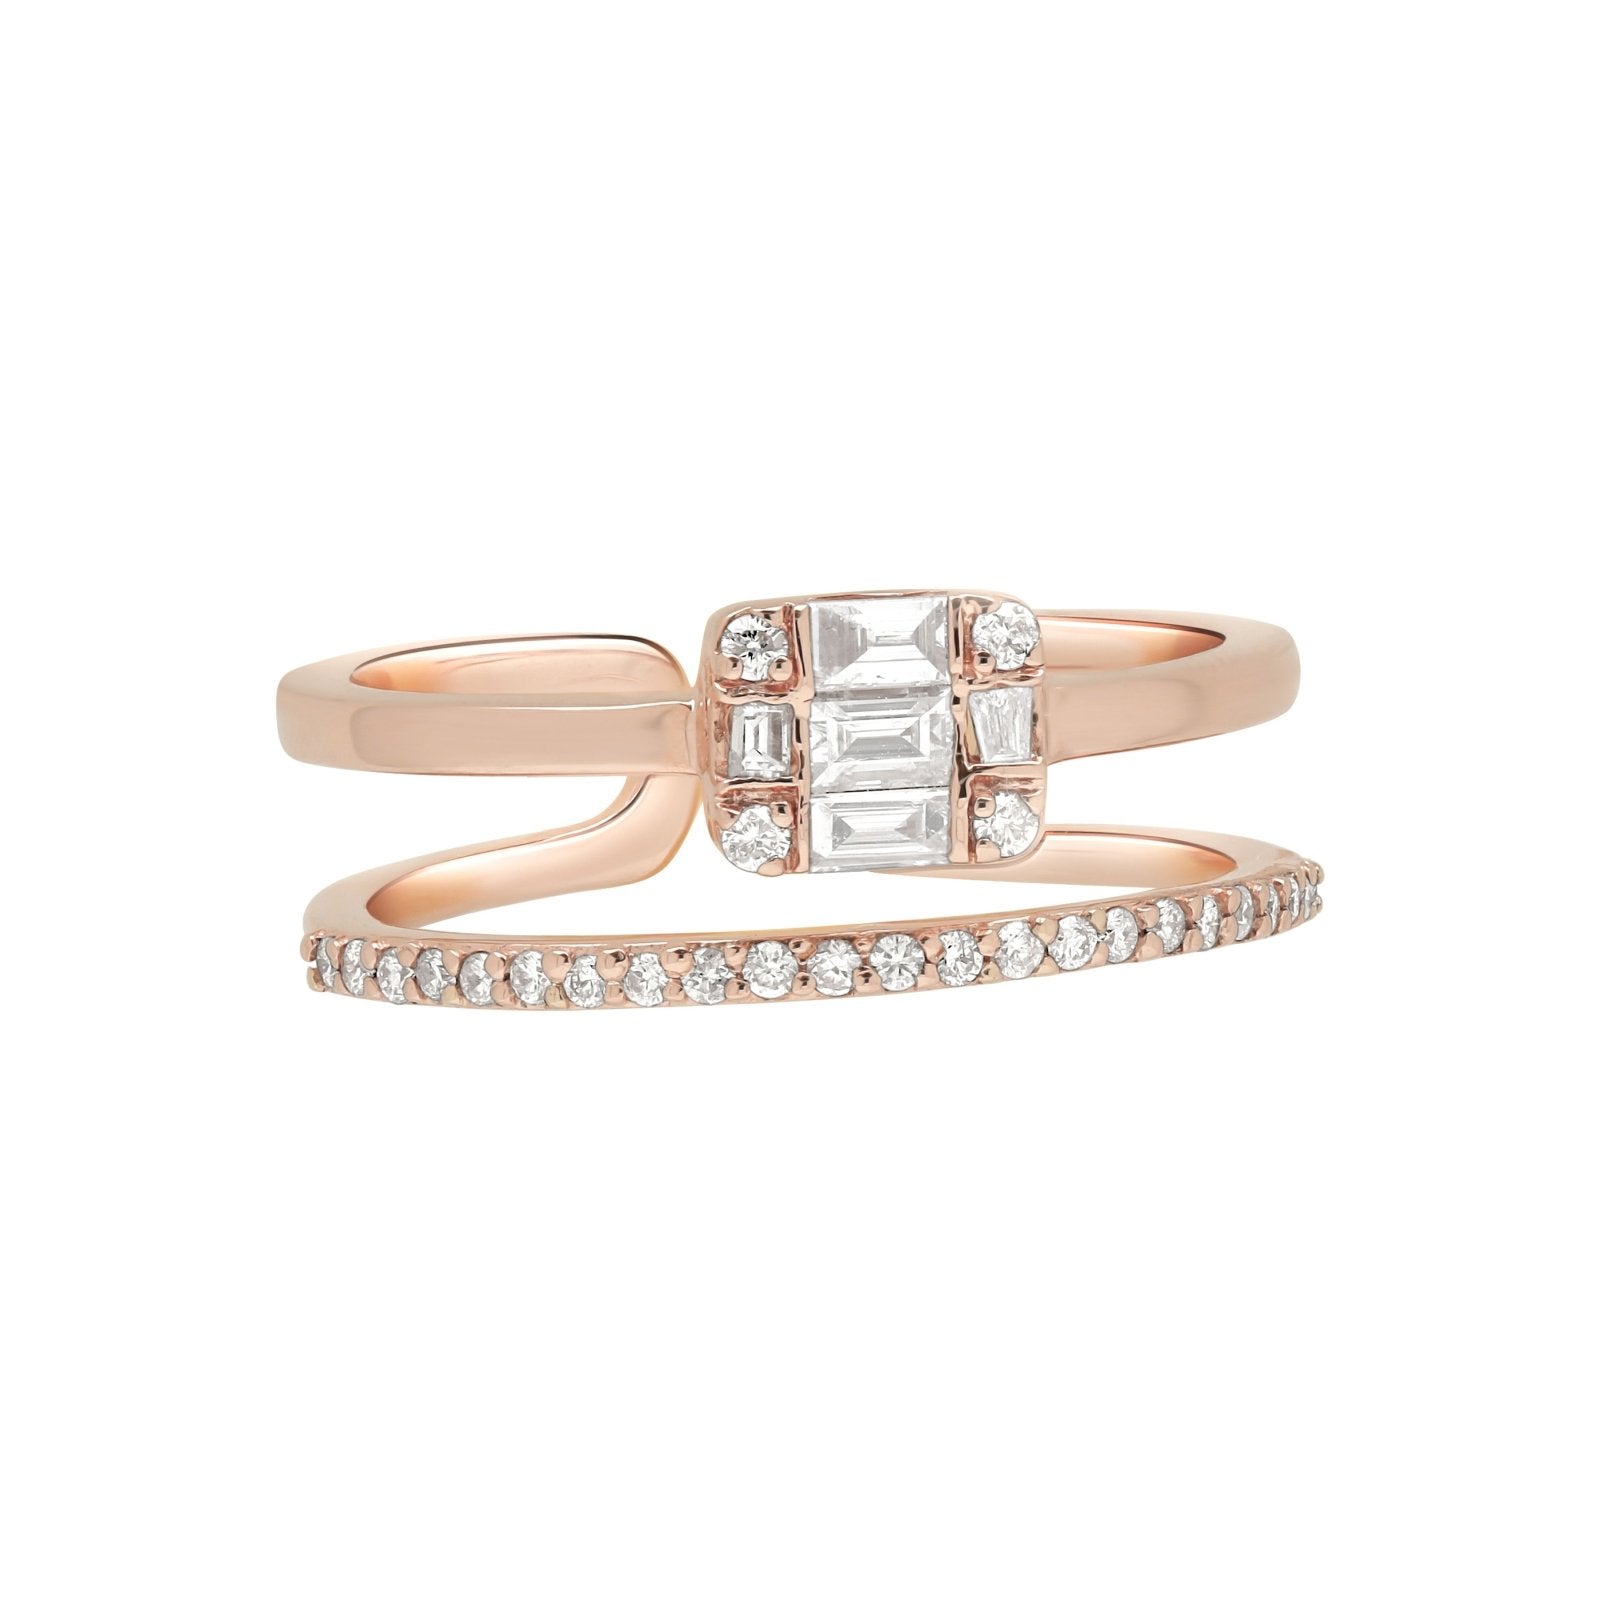 Eternity Band and Diamond Baguette Illusion Double Ring Rings Estella Collection #product_description# 17495 14k Diamond Engagement Ring #tag4# #tag5# #tag6# #tag7# #tag8# #tag9# #tag10# 6 14K Rose Gold